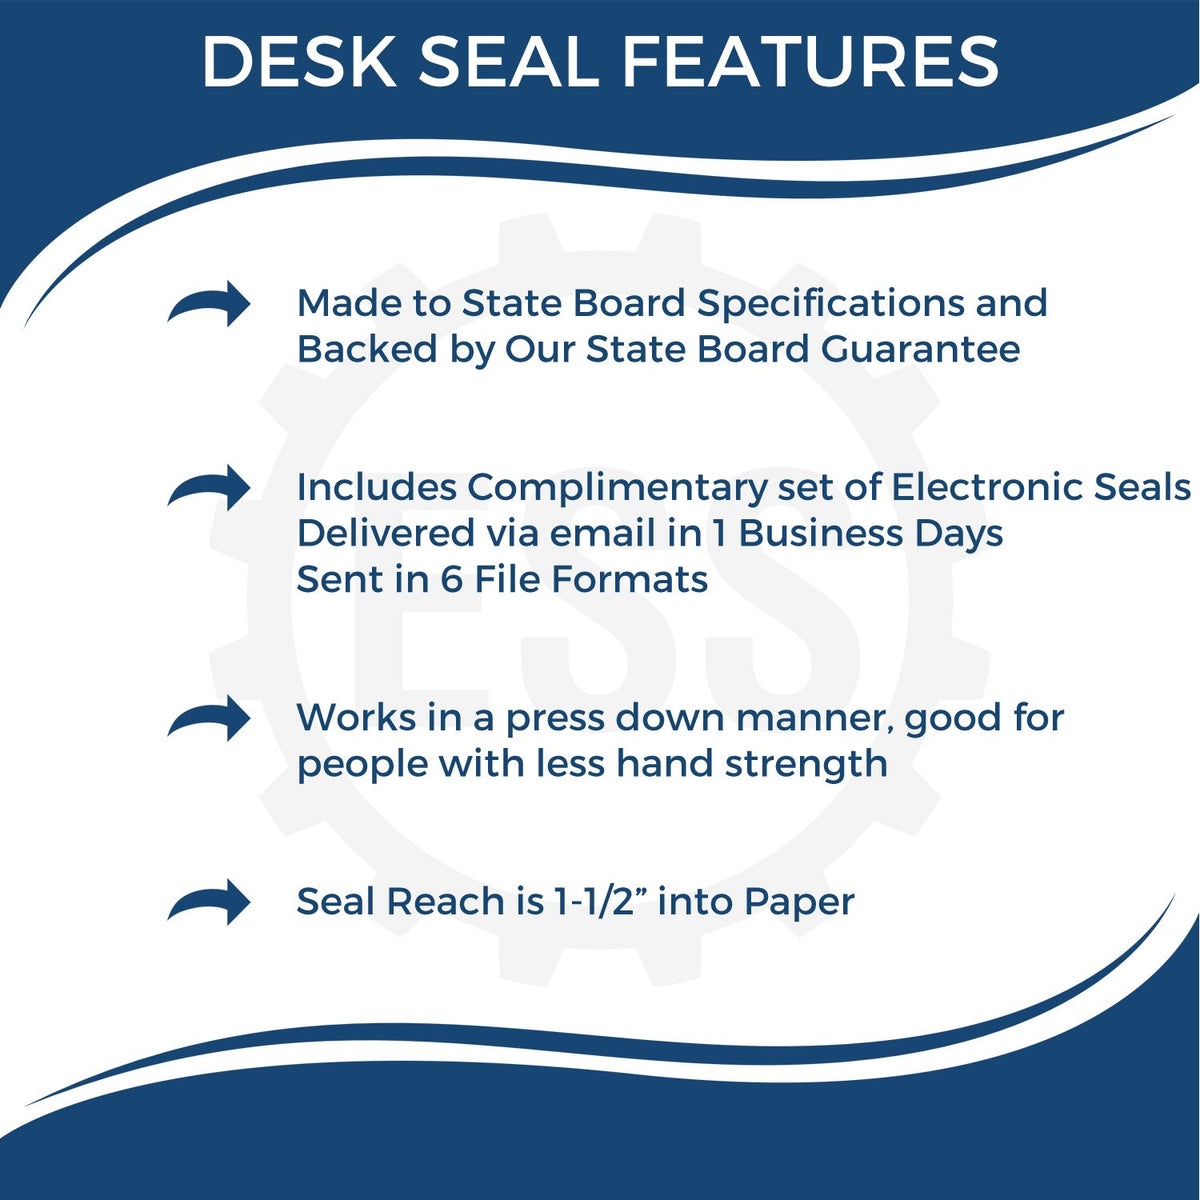 A picture of an infographic highlighting the selling points for the Washington Engineer Desk Seal